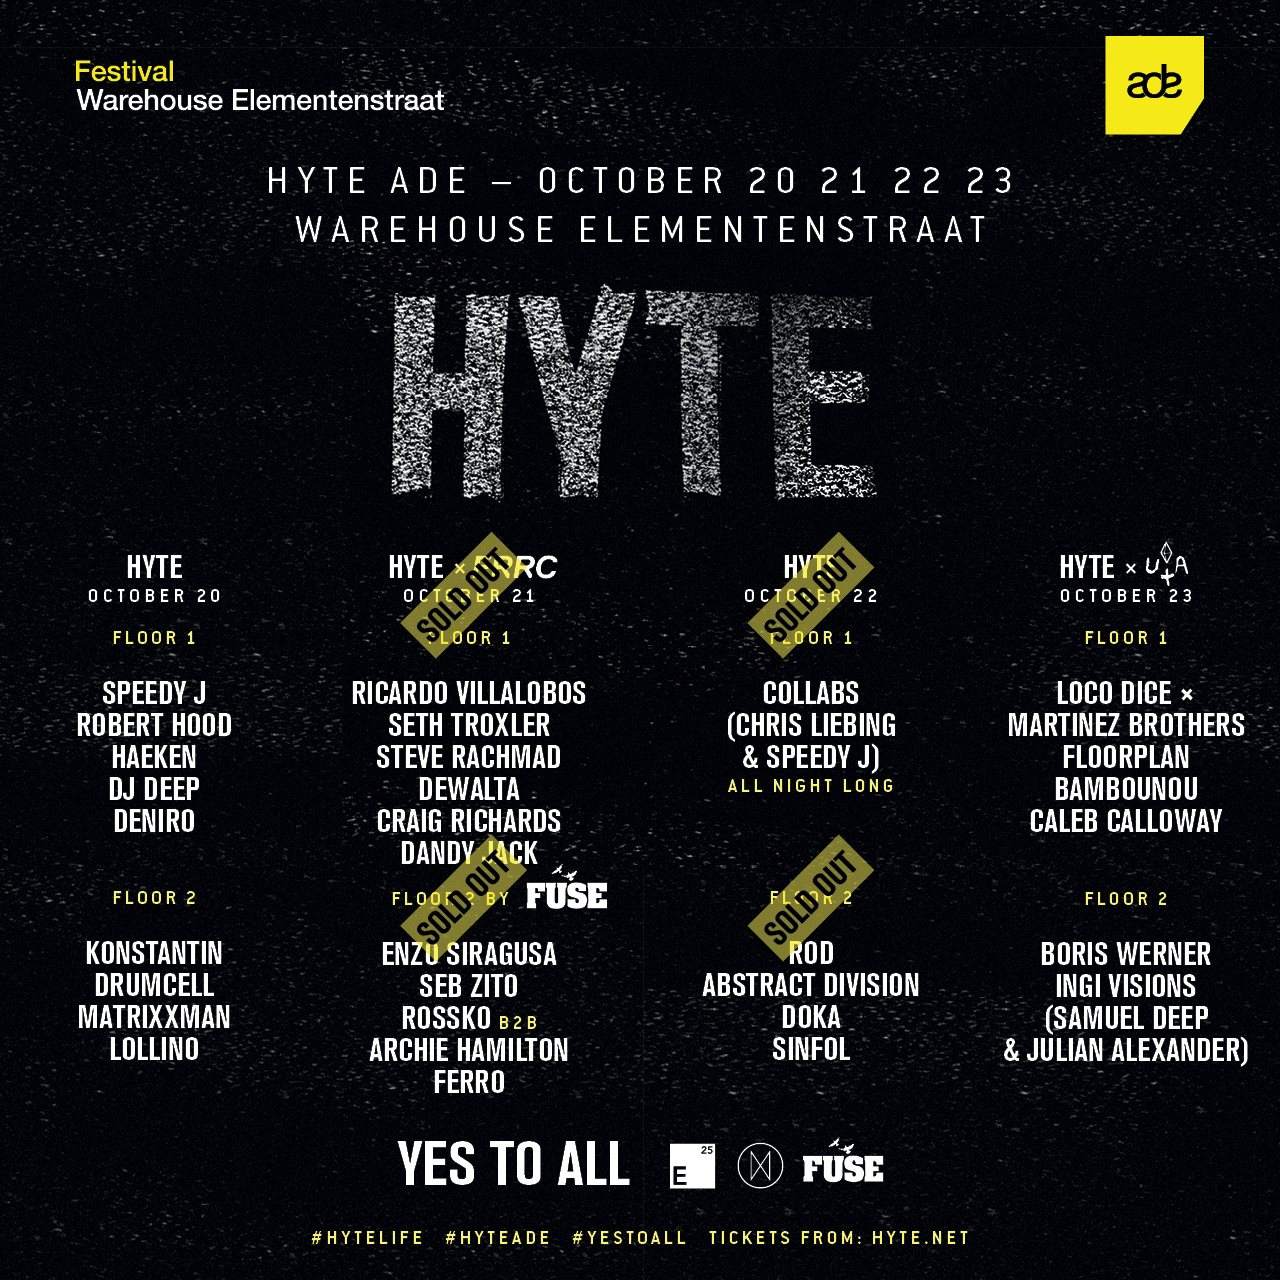 Hyte ADE x Used + Abused with Loco Dice x The Martinez Brothers, Floorplan - フライヤー表